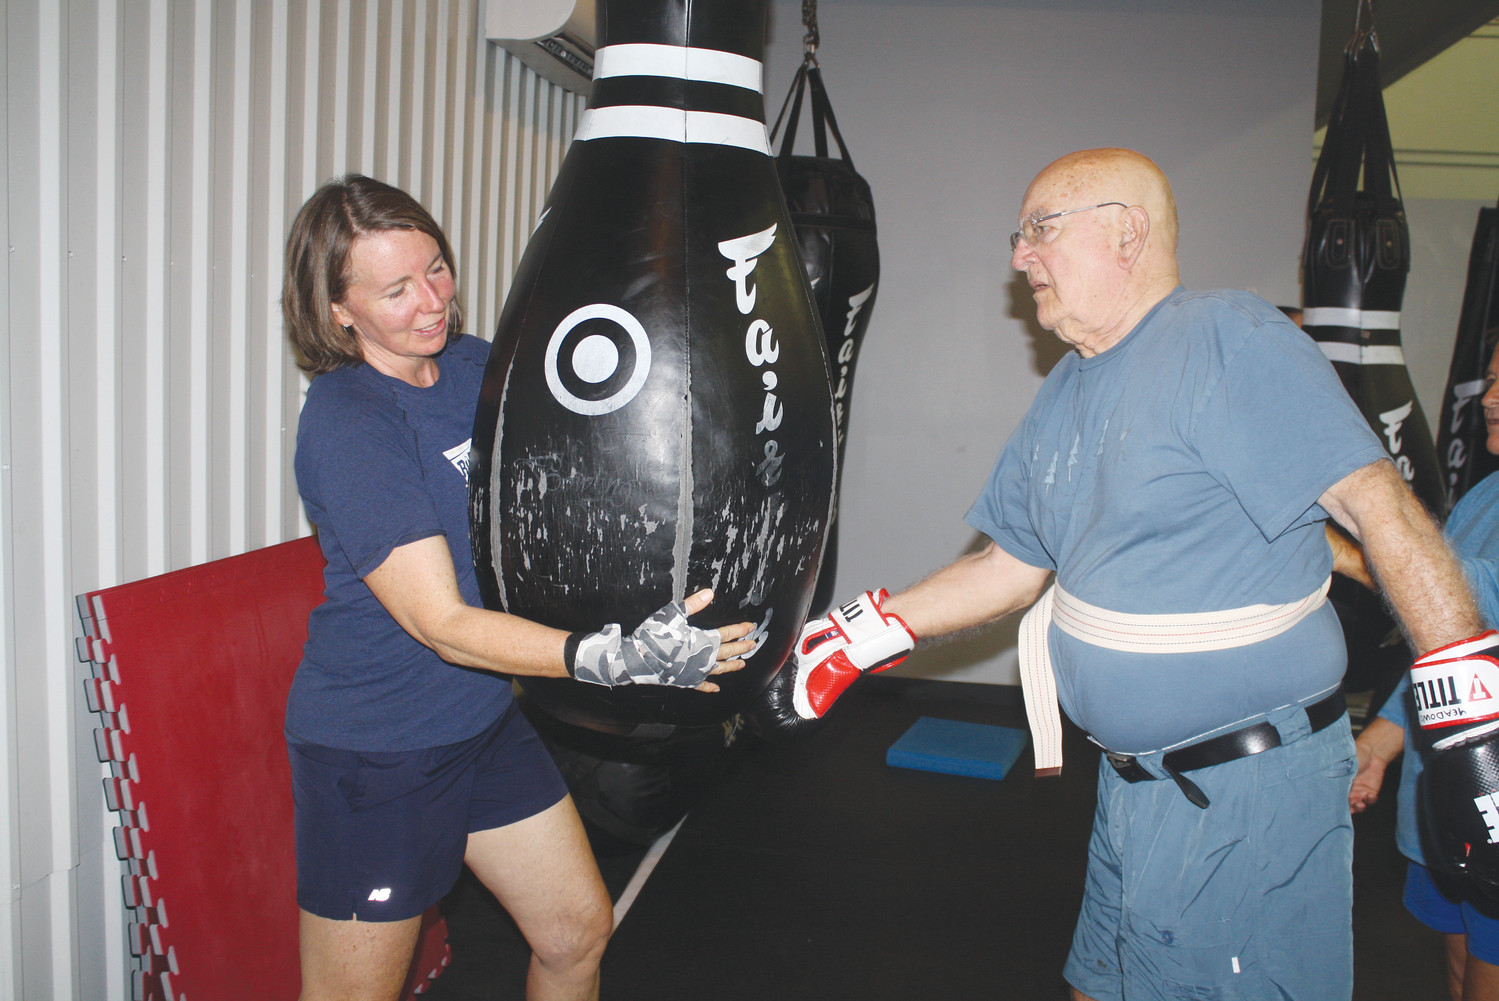 Kristen Gray (left) guides a “fighter” through a boxing routine during a training session.